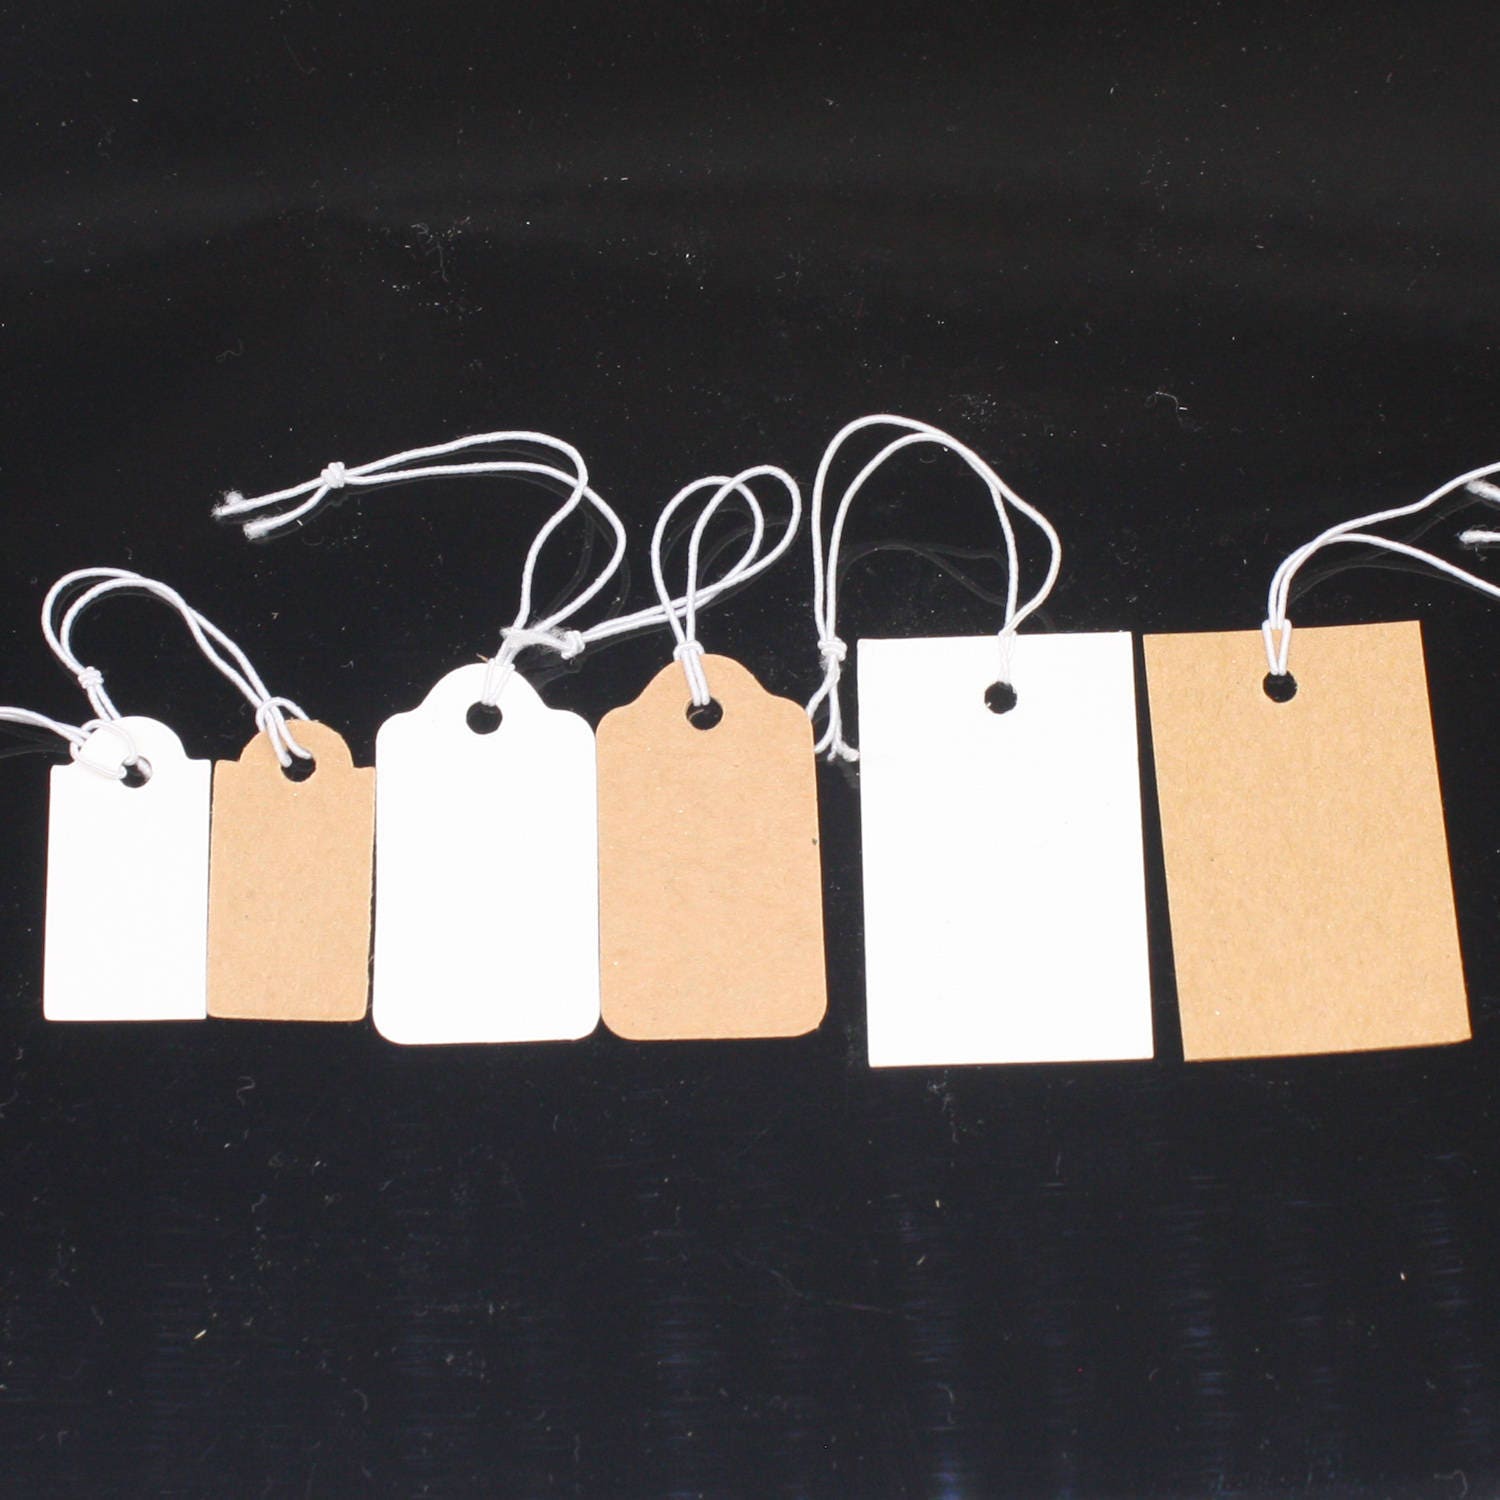 25 White Price Tags With String 23x14mm Set of 25 Labels Cardboard Marking  Tags for Jewelry Clothing 